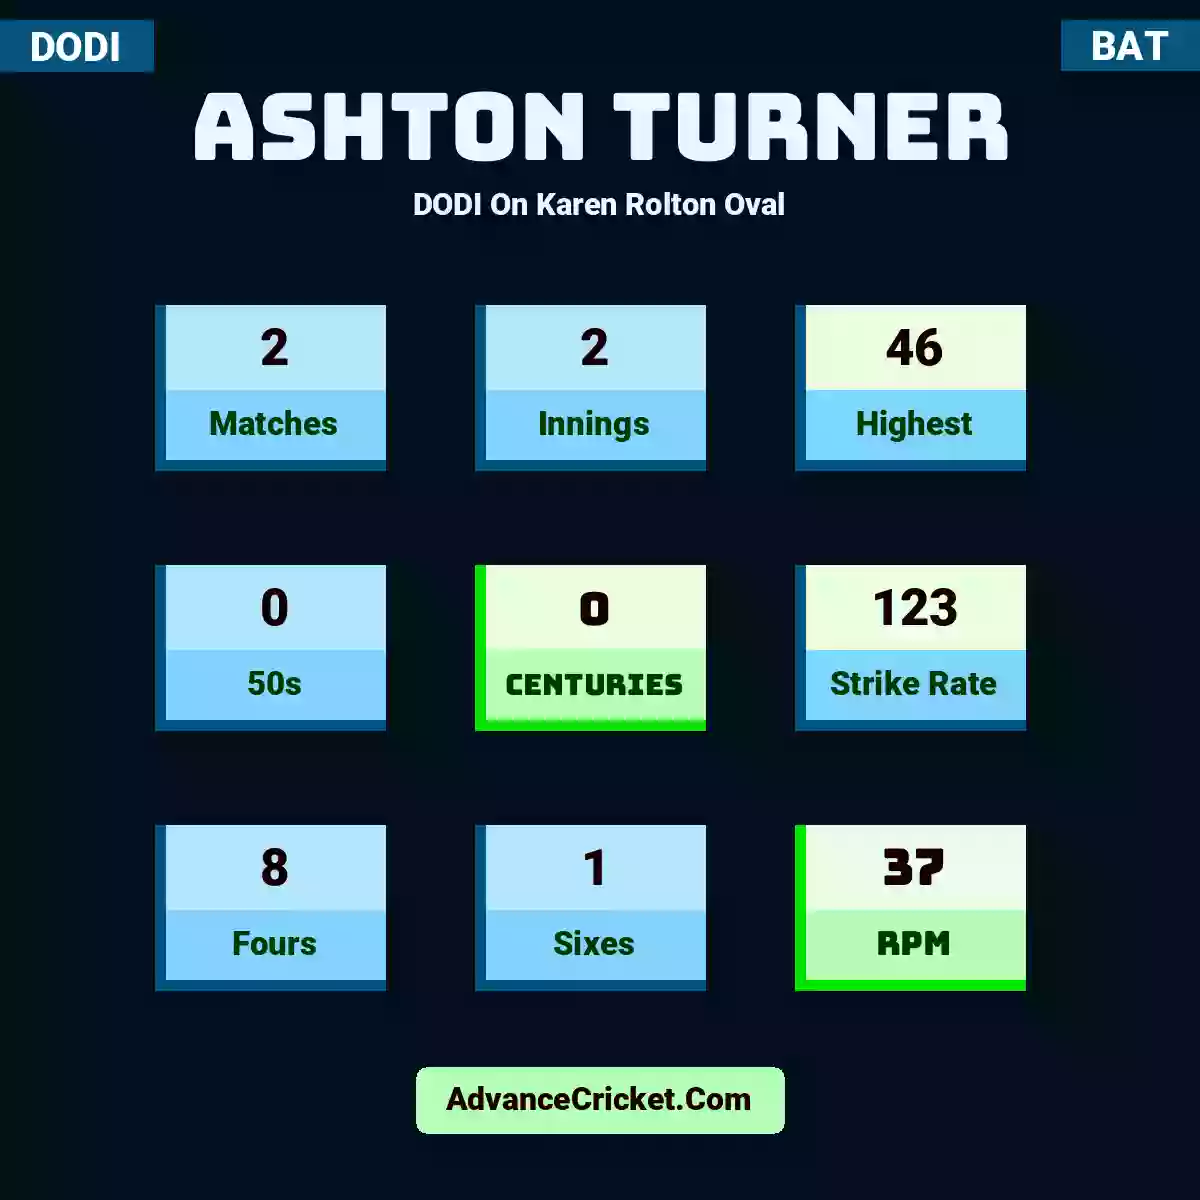 Ashton Turner DODI  On Karen Rolton Oval, Ashton Turner played 2 matches, scored 46 runs as highest, 0 half-centuries, and 0 centuries, with a strike rate of 123. A.Turner hit 8 fours and 1 sixes, with an RPM of 37.